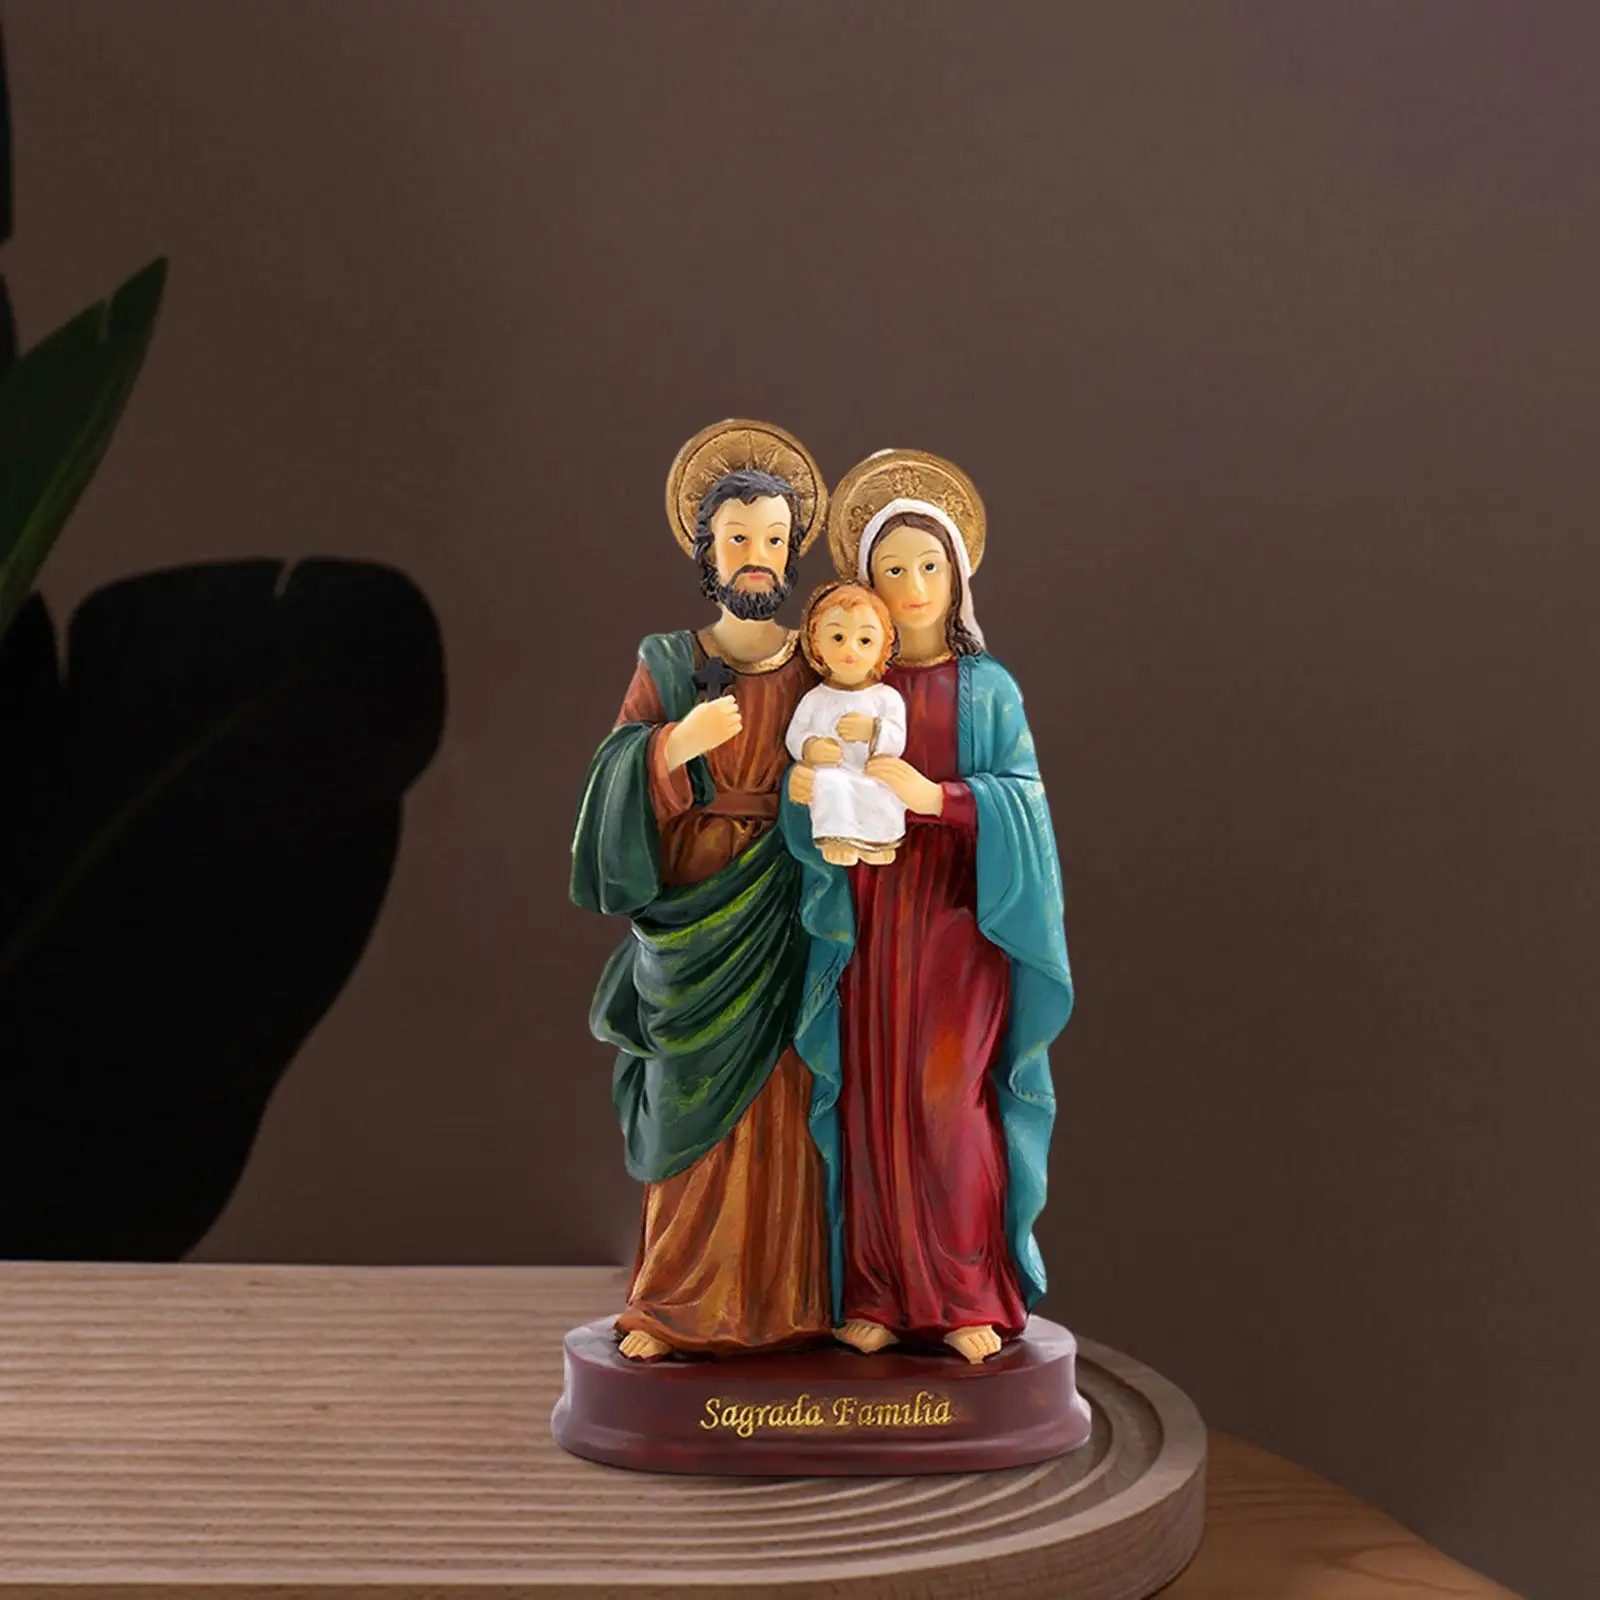 Holy Family Statue Jesus Figurine Collectible Religious Sculpture Mary Joseph Figures for Shelf Christmas Living Room Decor Gift